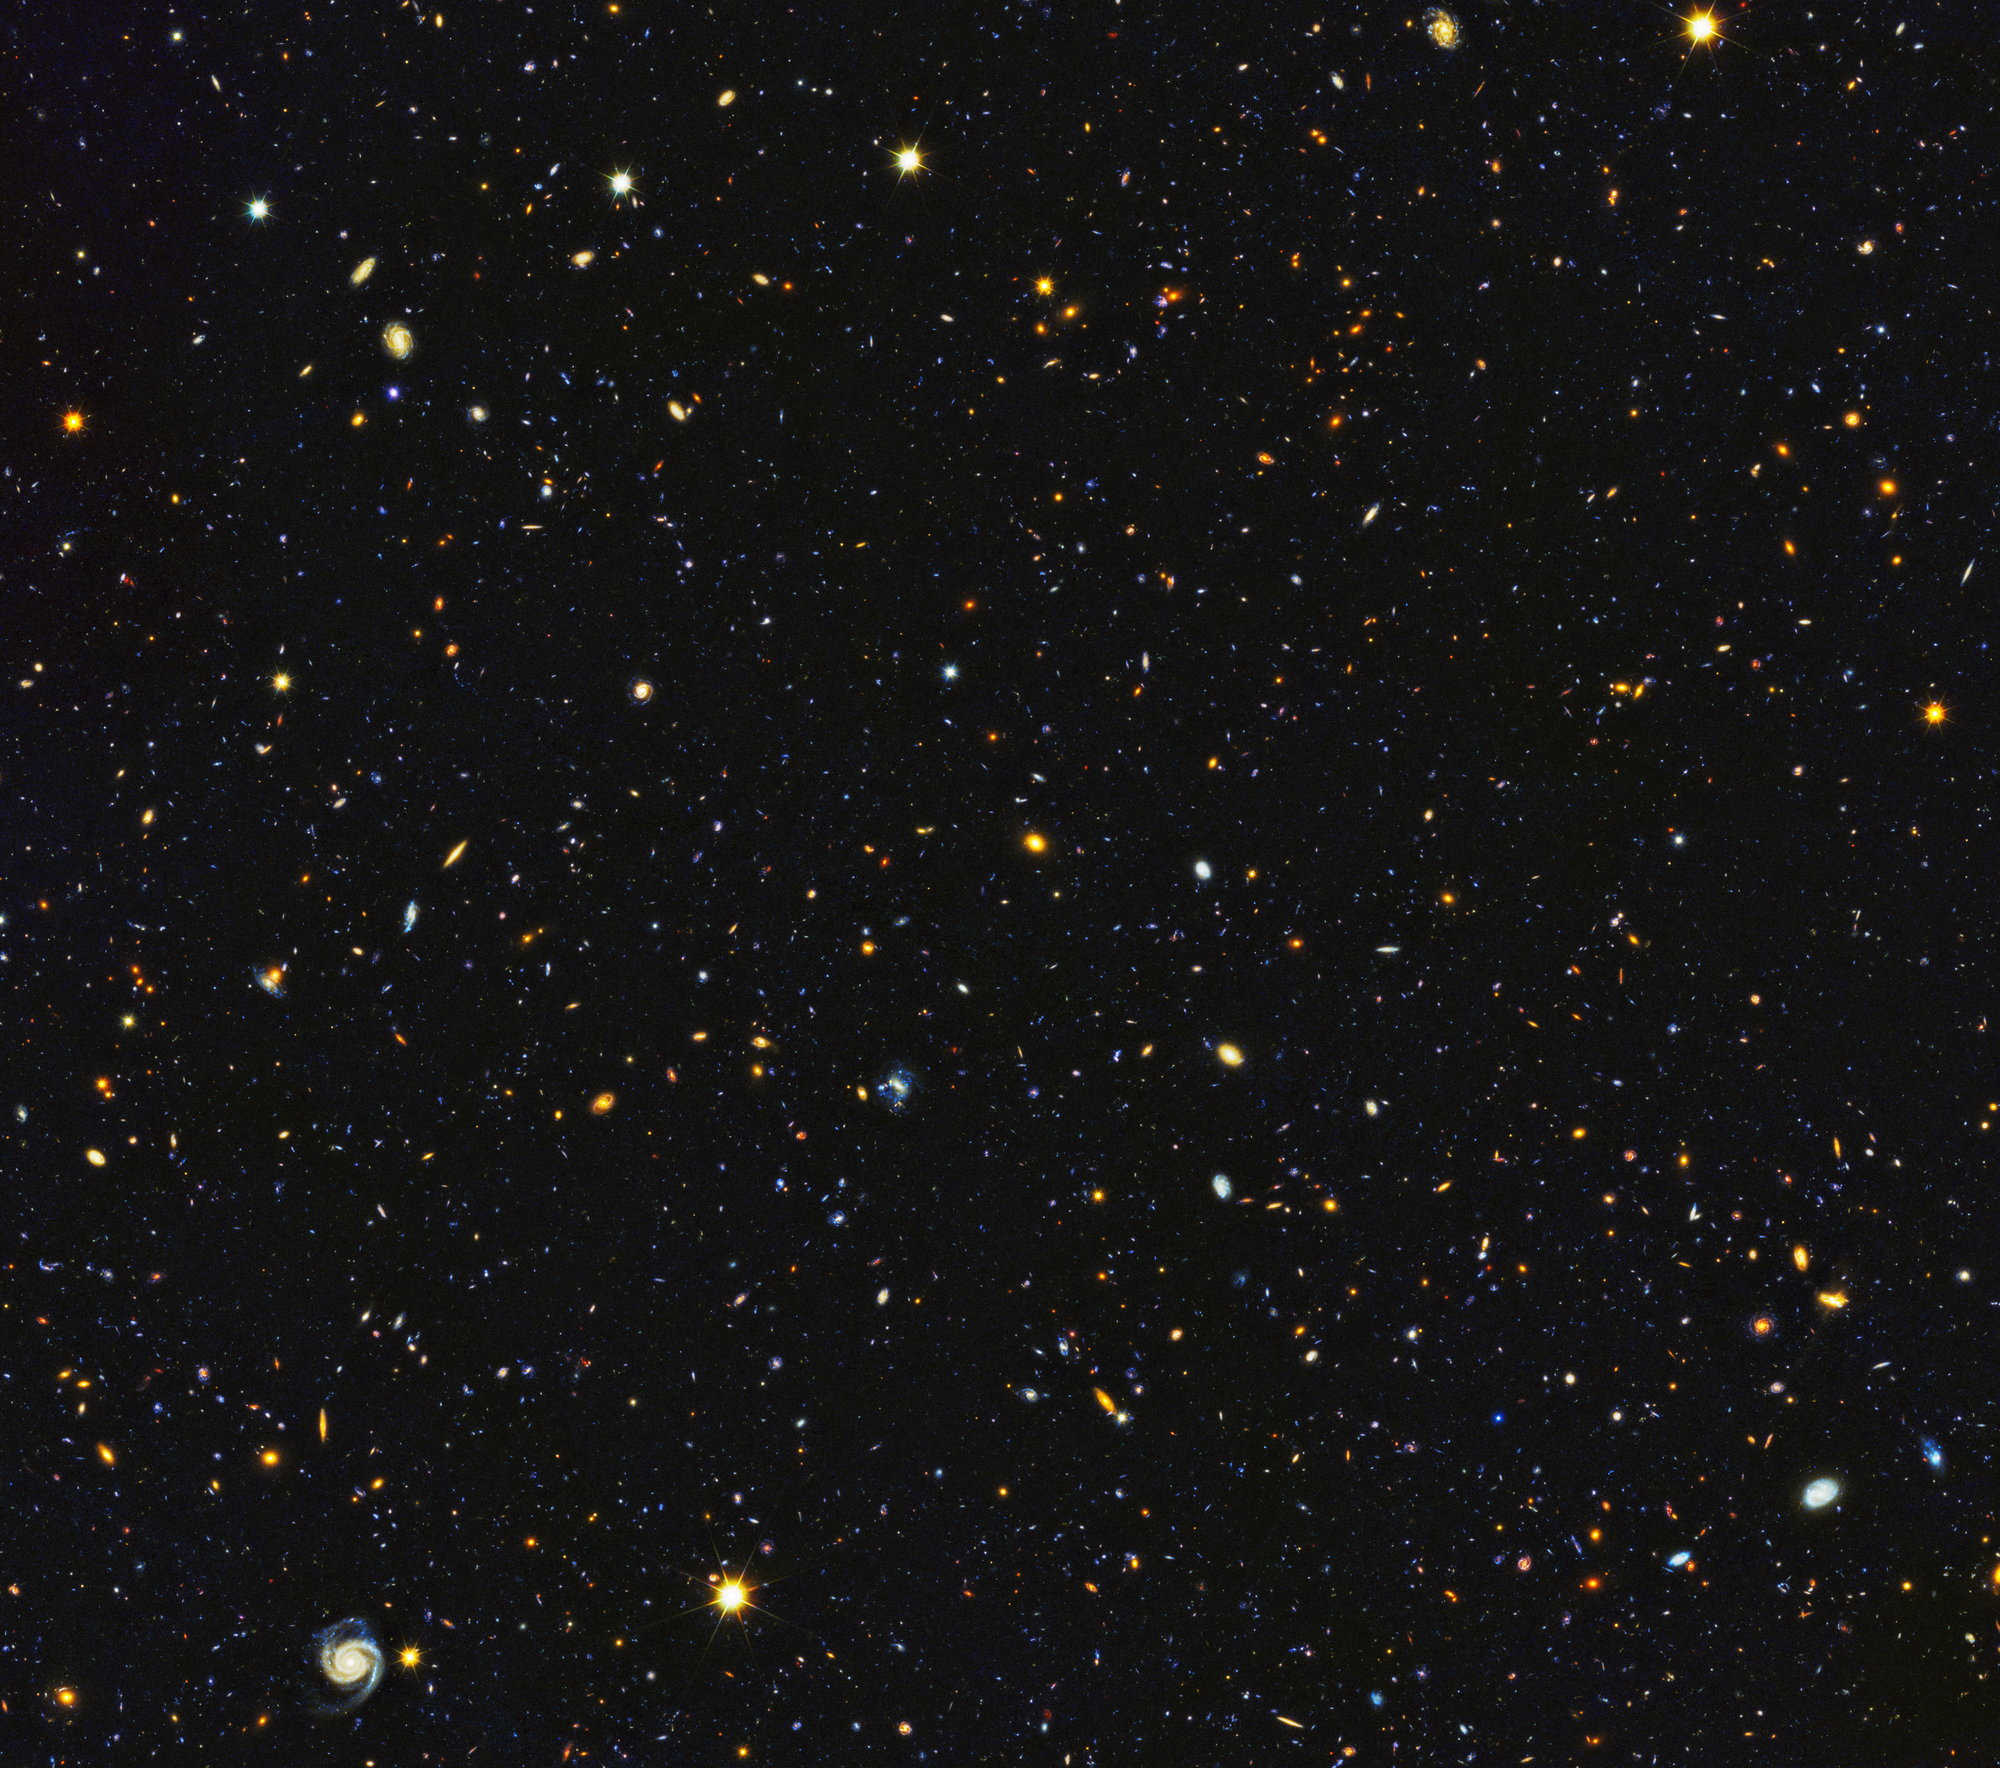 Image is filled with distant galaxies in colors of yellow-gold, red, blue, white. Lower left holds a face on spiral galaxy.